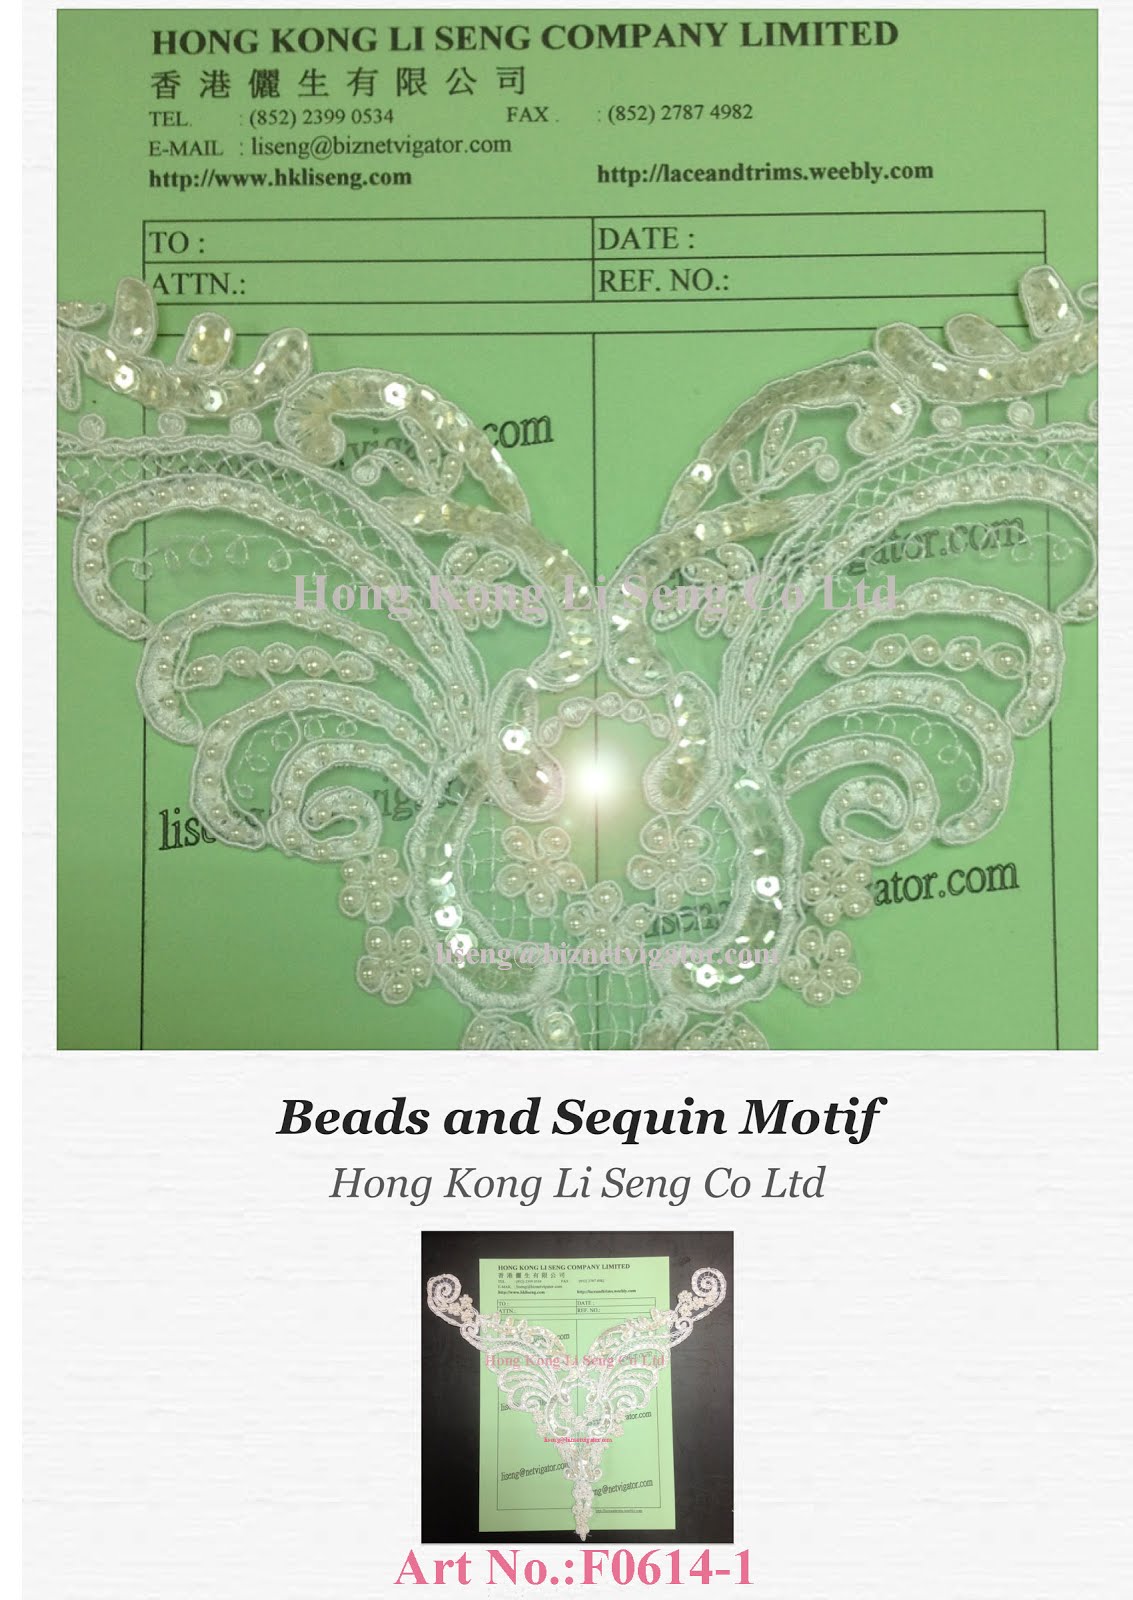 Major Supply Beads and Sequins Applique Manufacturer Wholesaler and Supplier